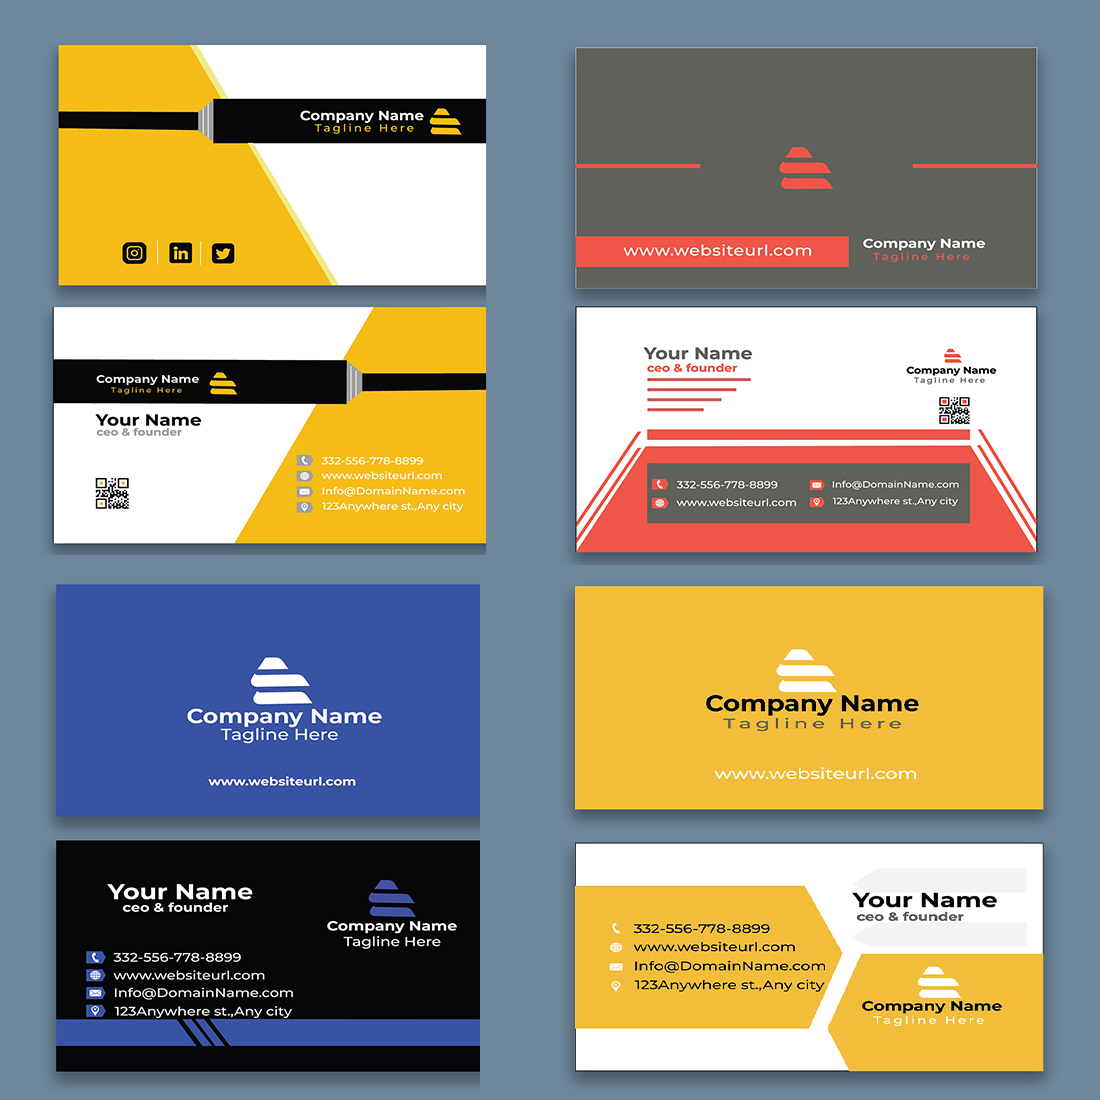 4 Modern and professional business cards Bundle cover image.